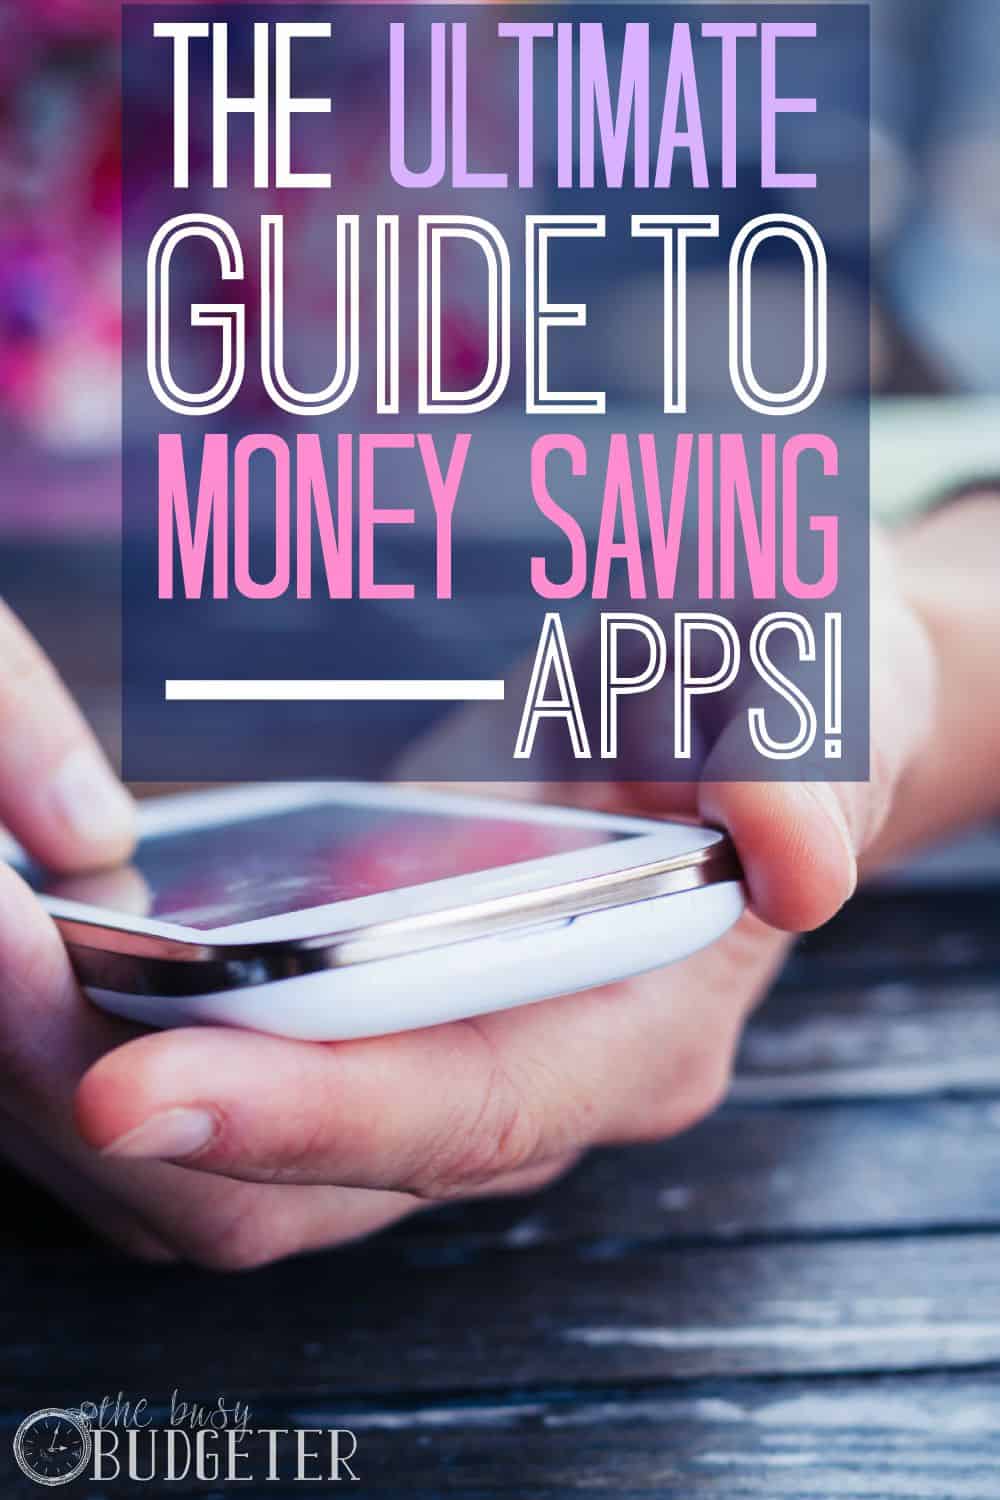 The Ultimate Guide To Money Saving Apps!